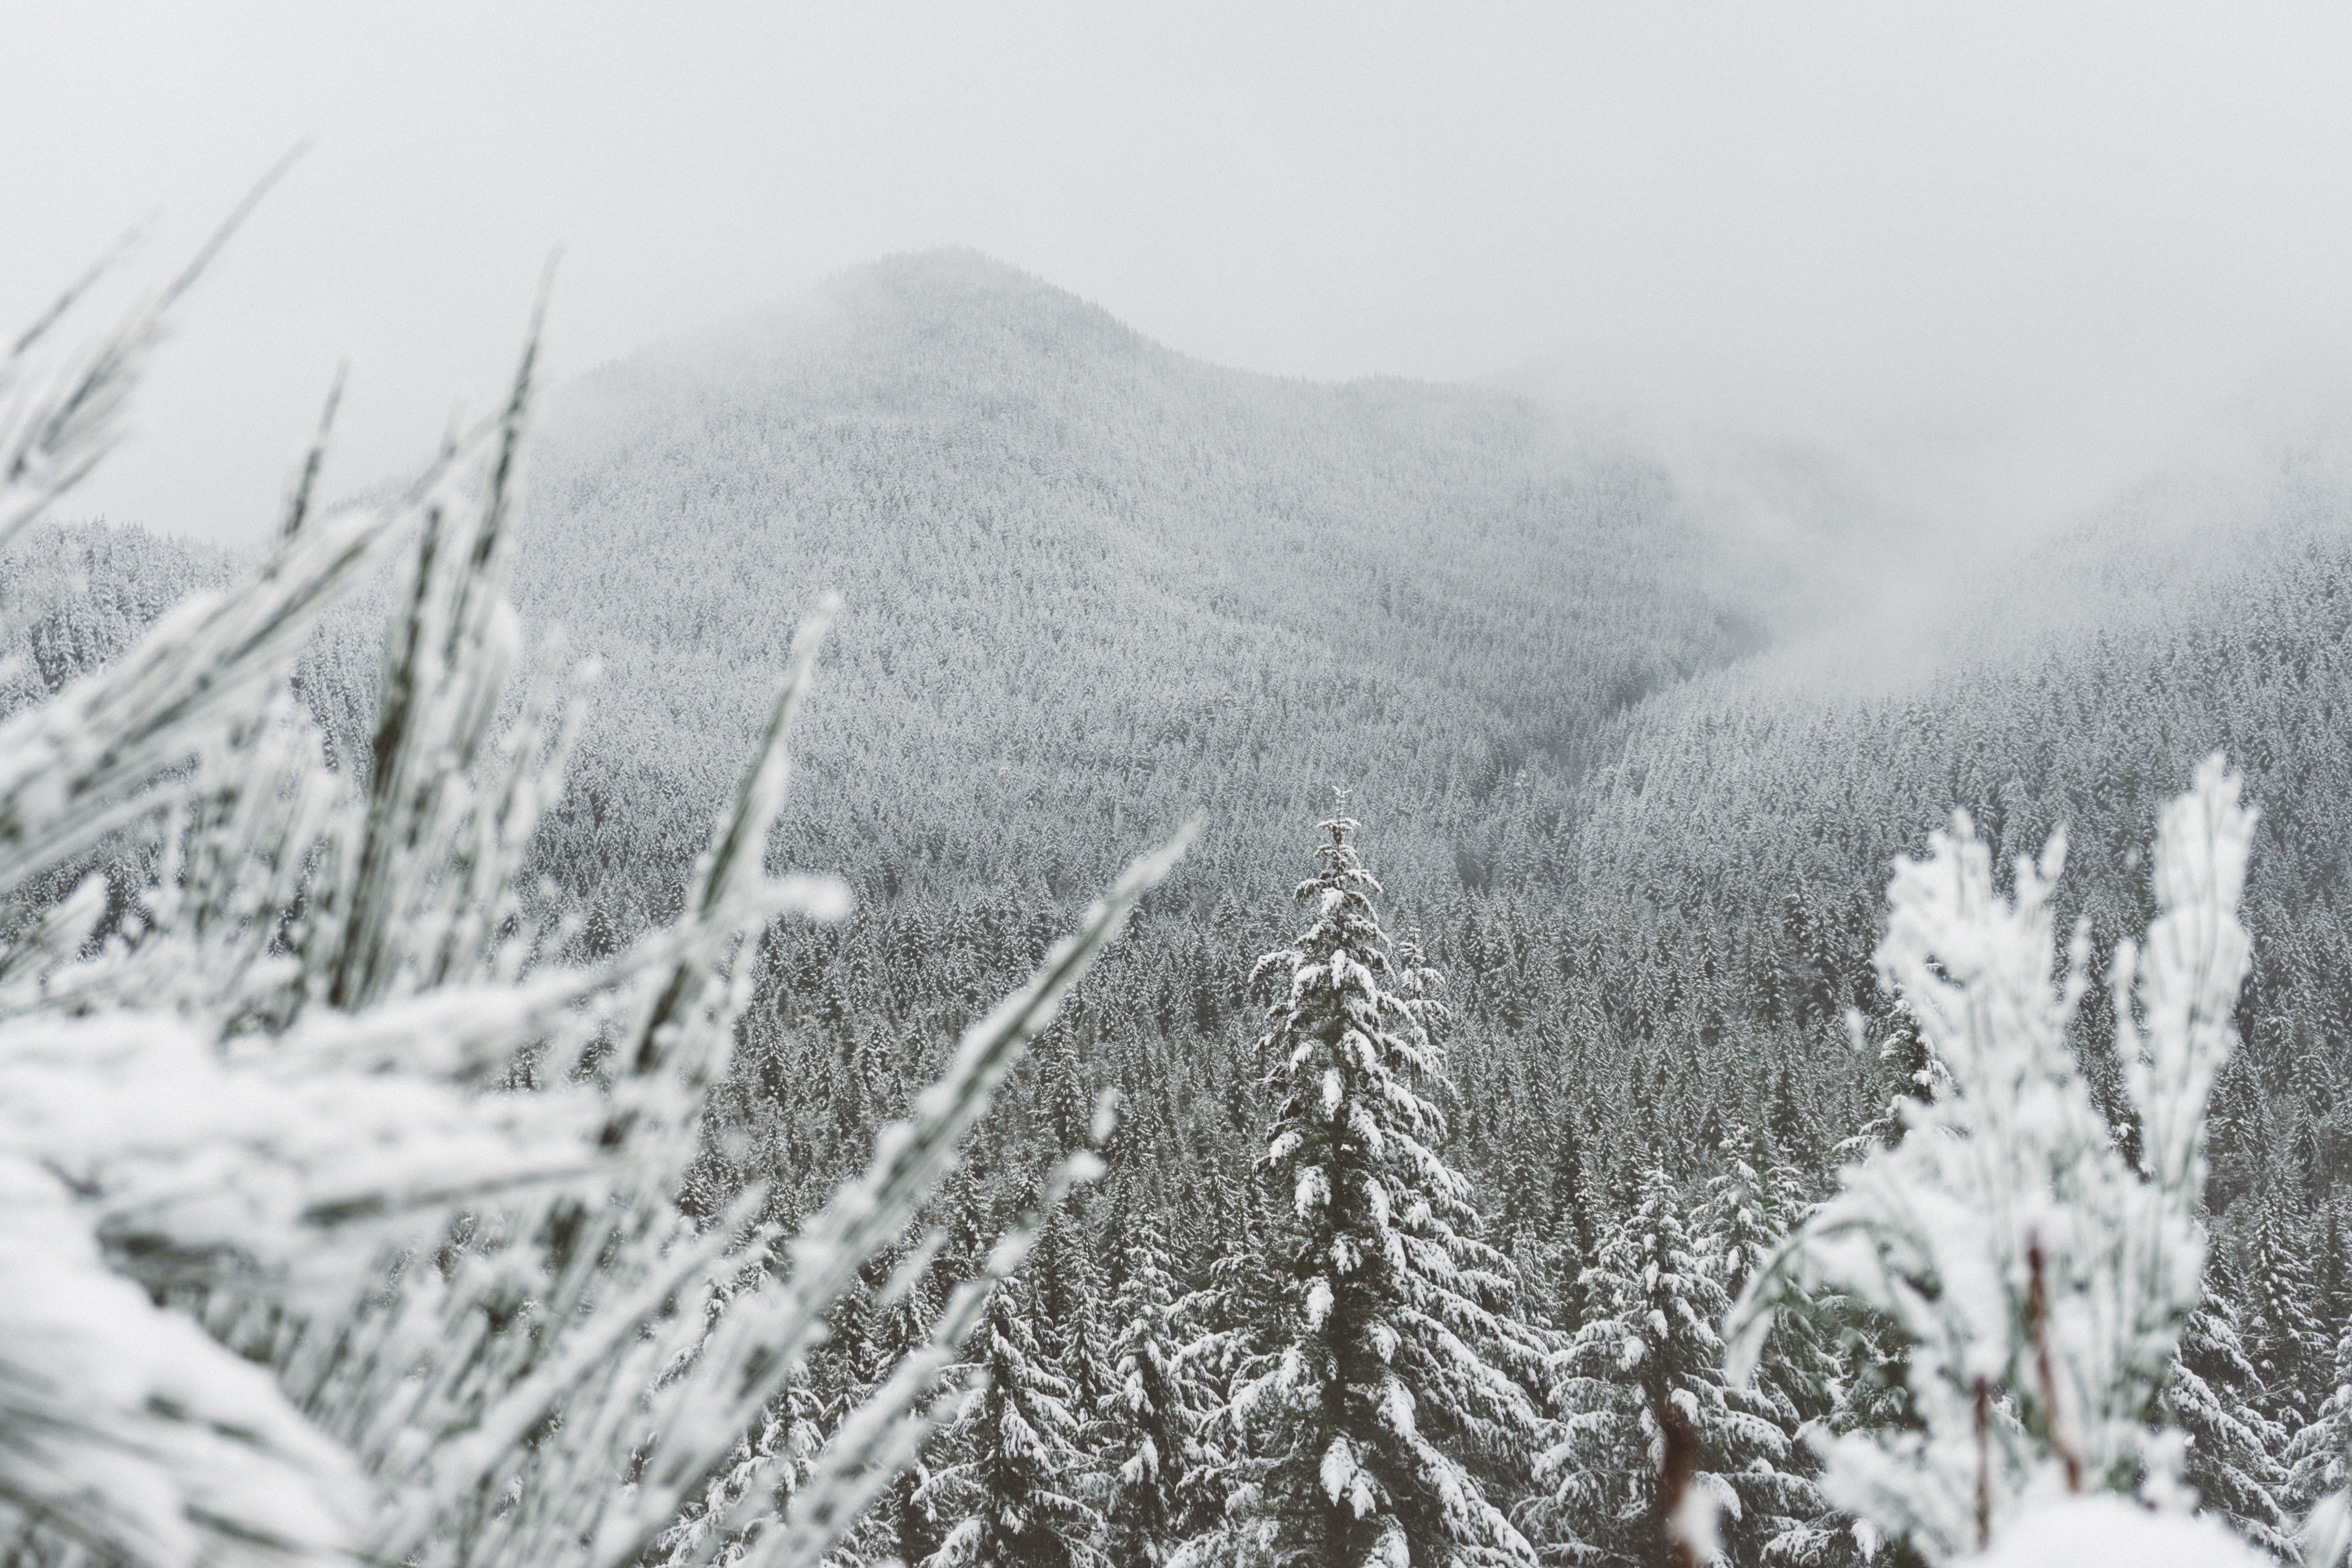 6000x4000 #valley, #weather, #fog, #wallpaper, #snow, #ice, #wood, #winter, #forest, #christmas wallpaper, #mountain, #evergreen, #white, # pine, #slope, #Free , #fir, #cloud, #tree, #christmas background, #cold. Mocah HD Wallpaper